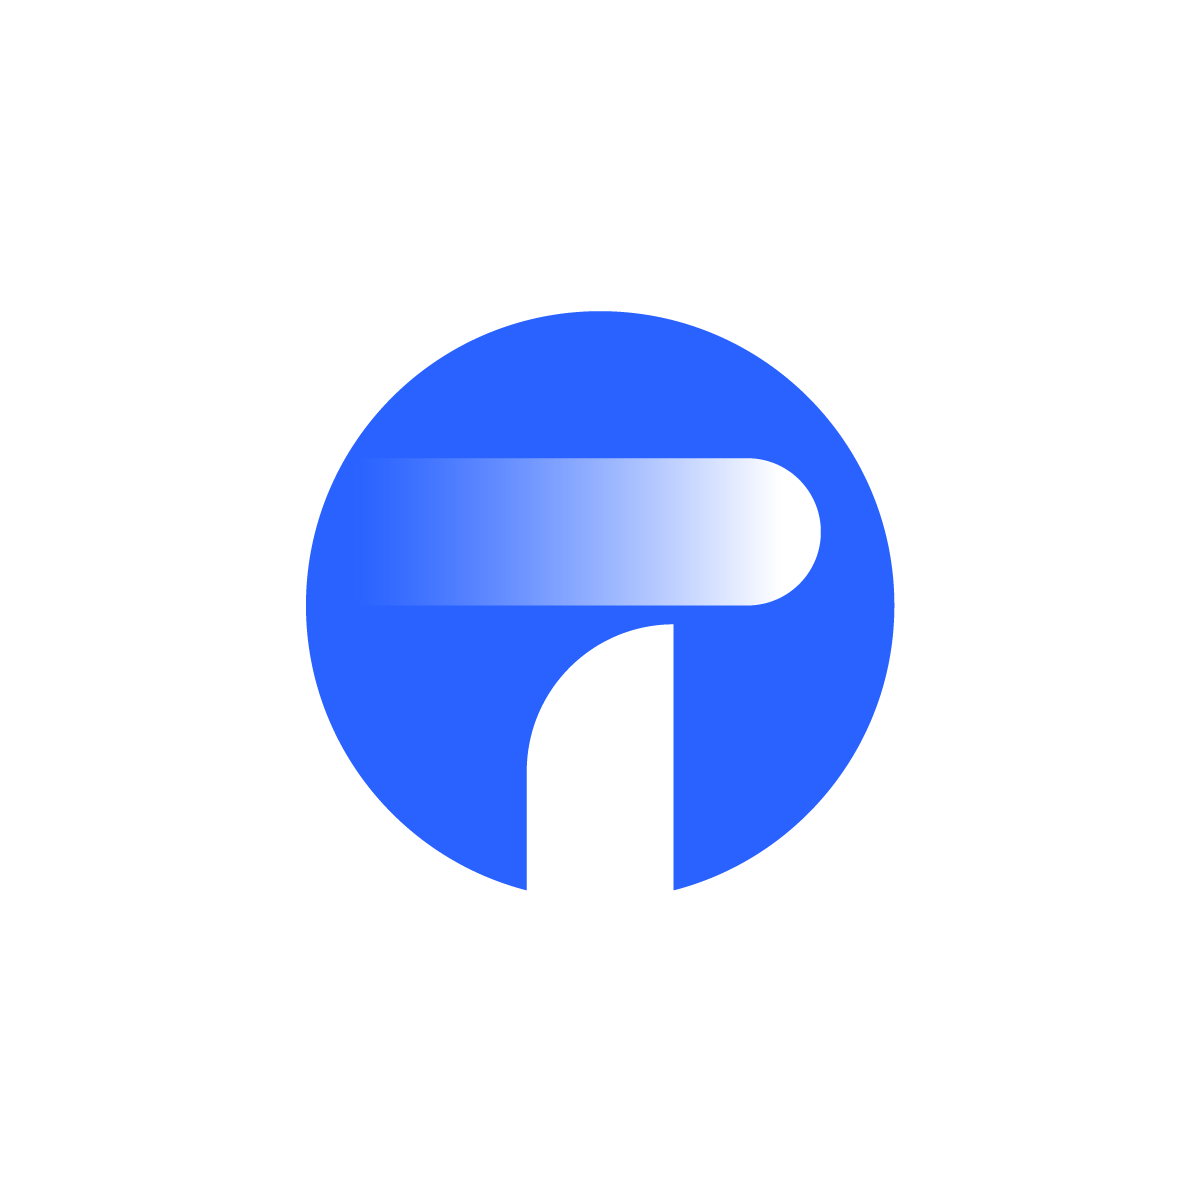 Circular logo with letter 'T' symbolizing speed, movement, and dynamic, suitable for crypto-related projects.